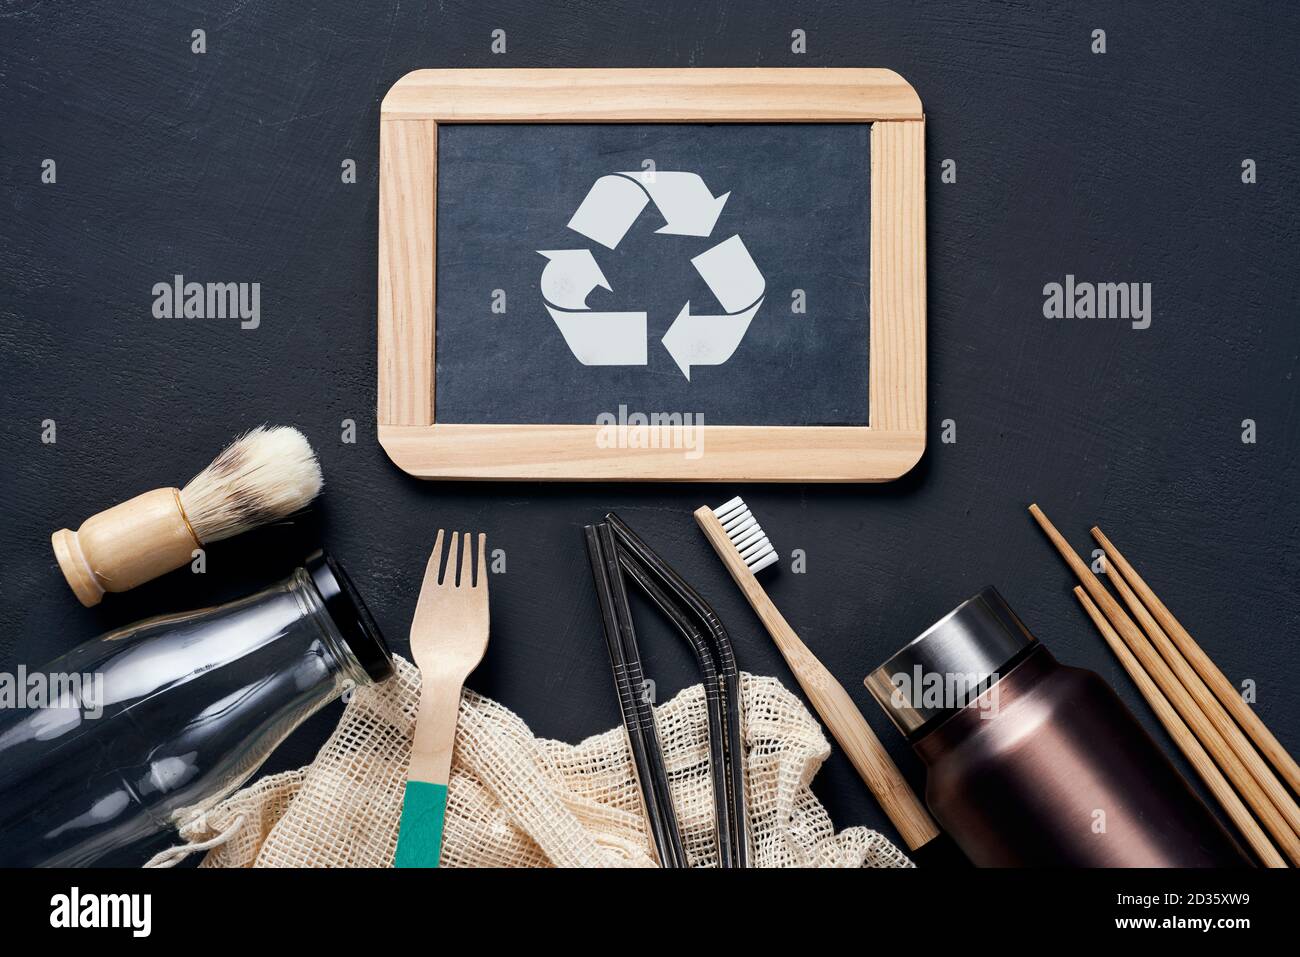 a pile of no-plastic sustainable household items, such as refillable metal and glass bottles, shopping mesh bags, or wooden toiletries, cutlery and ch Stock Photo